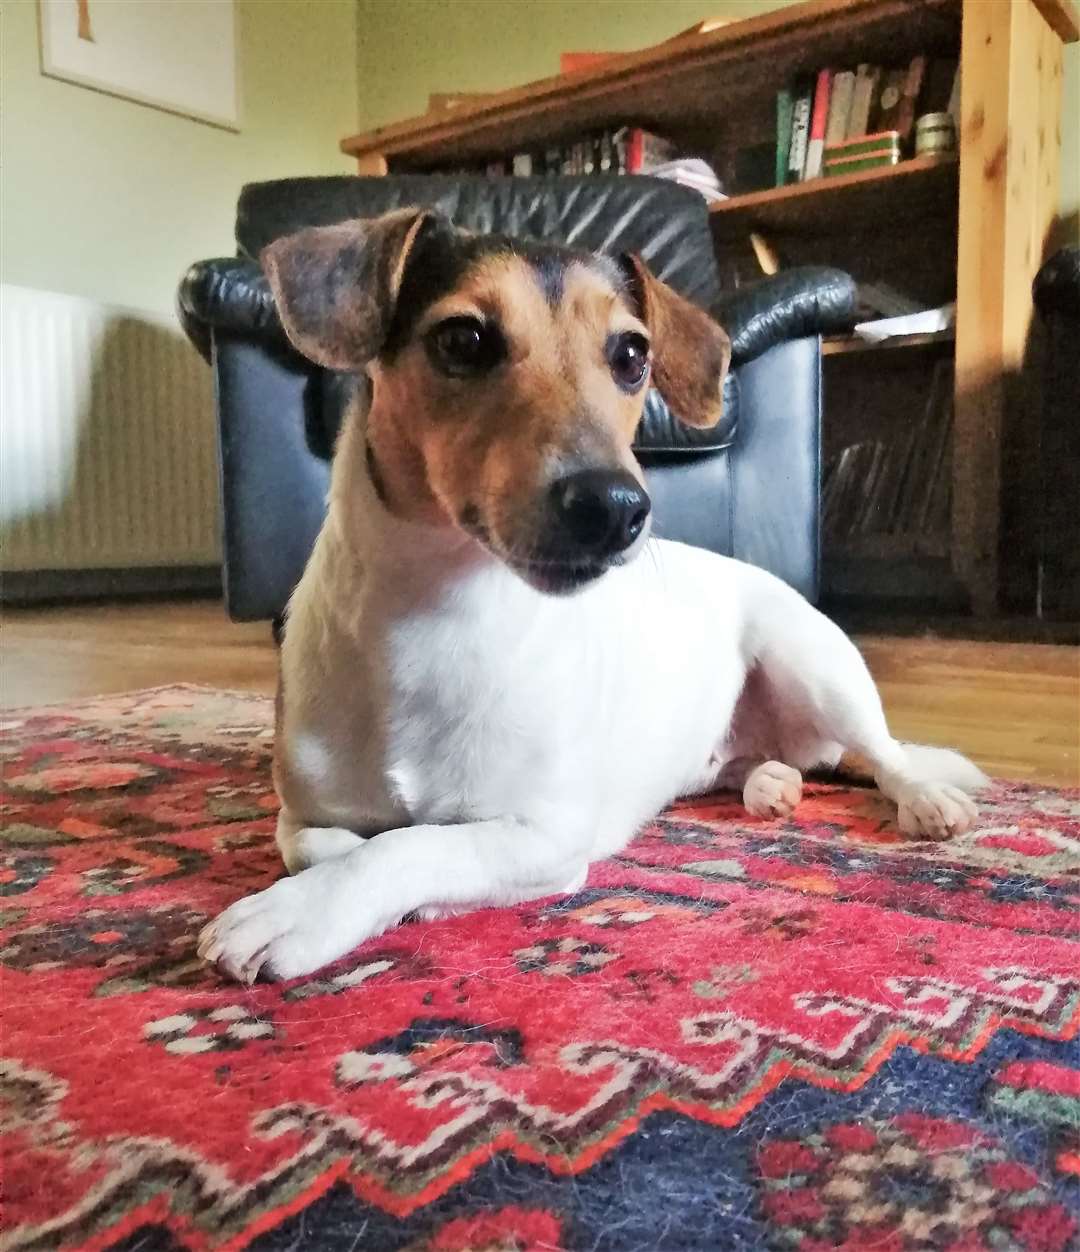 Audrey the Jack Russell relaxing.